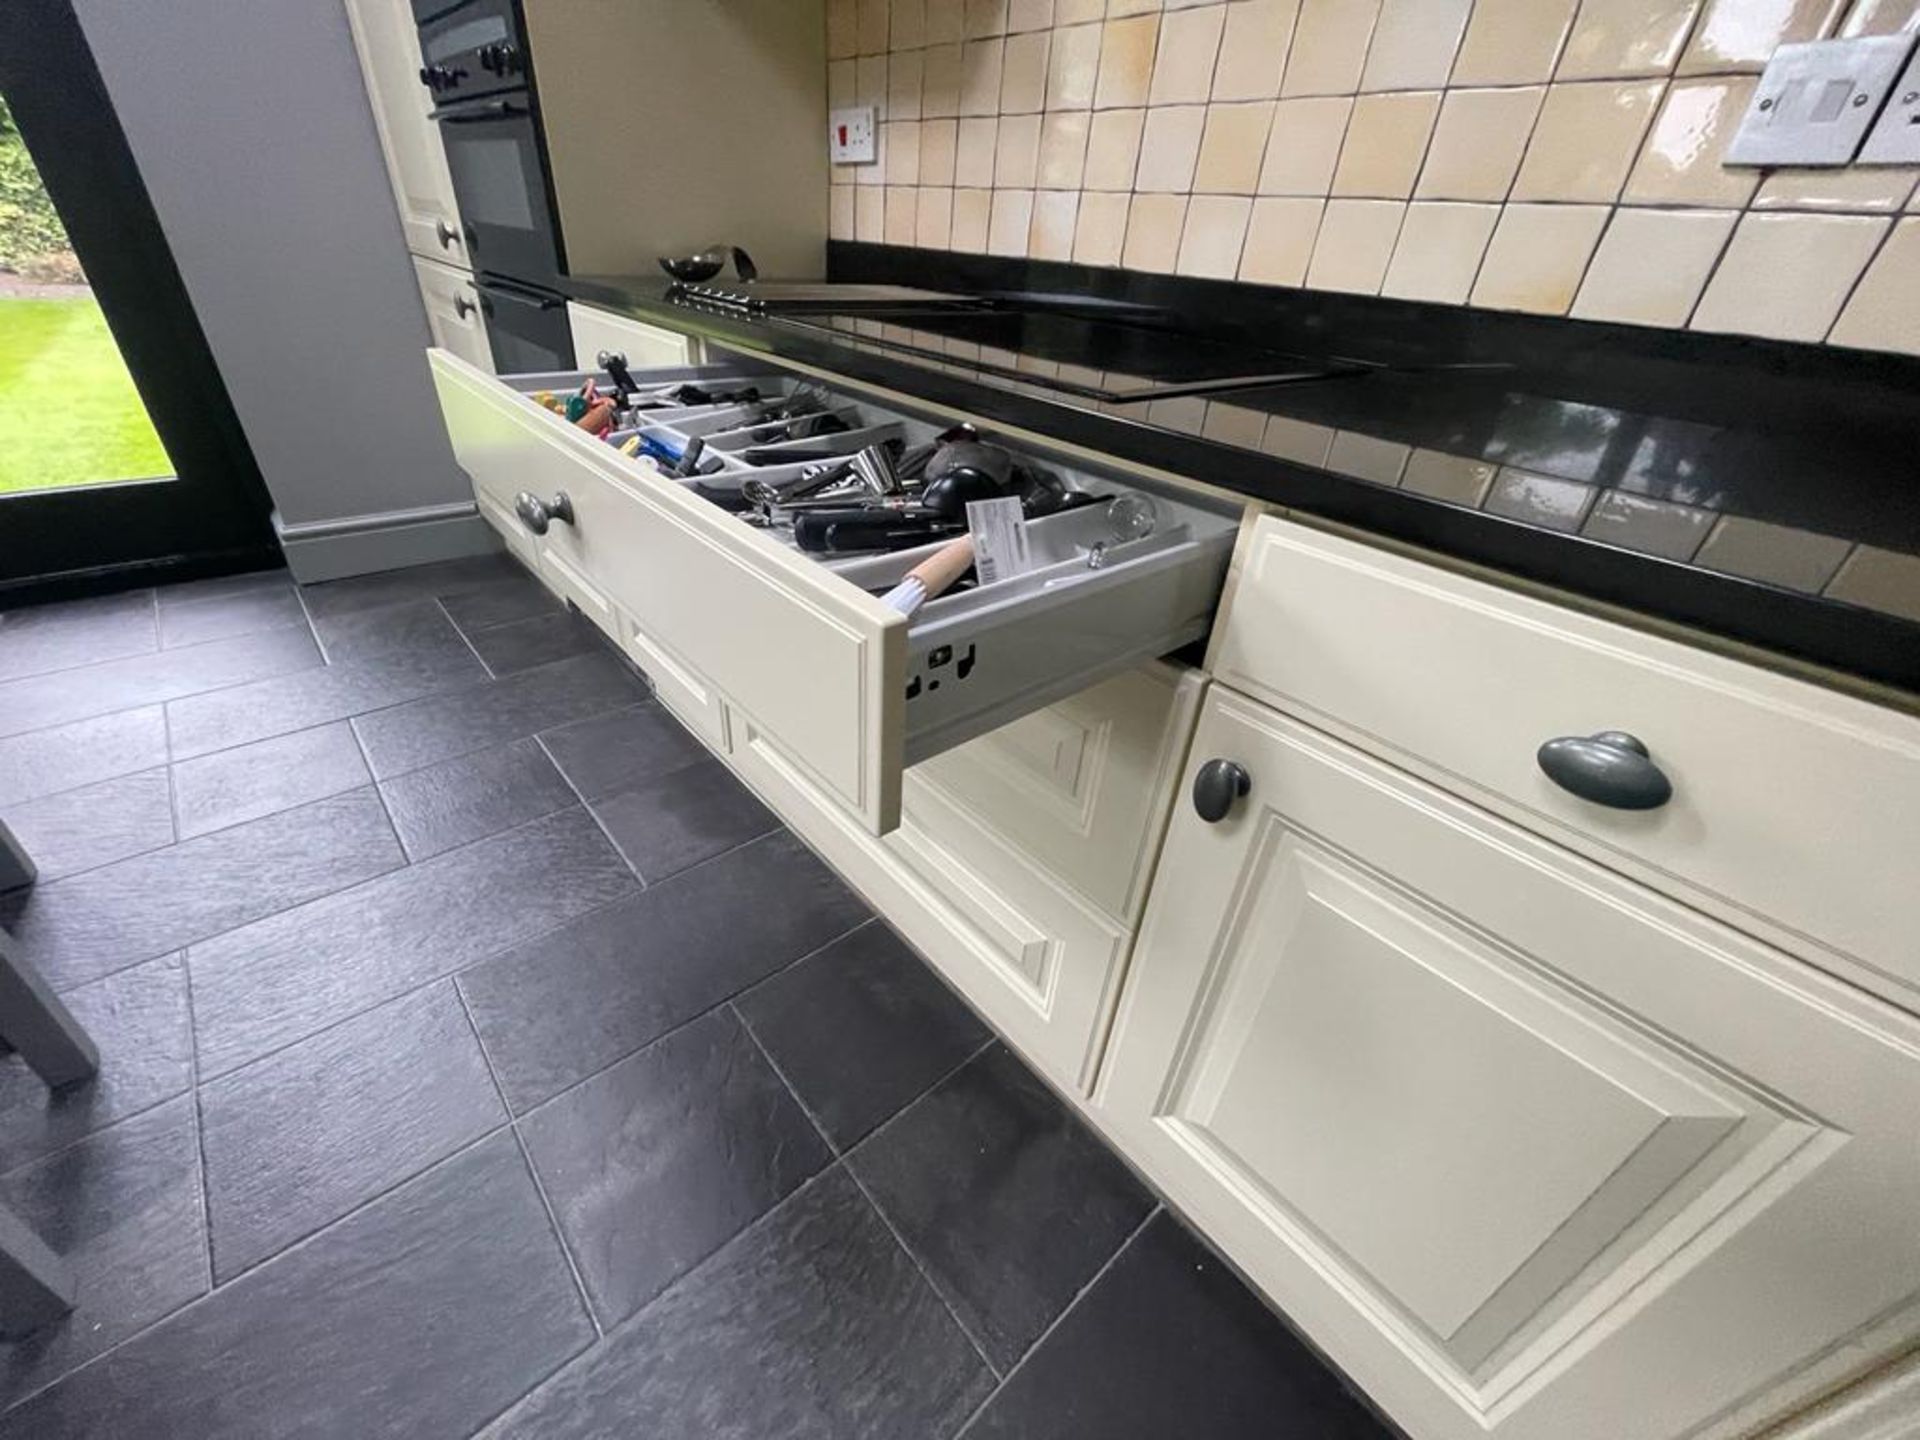 1 x Bespoke Keller Kitchen With Branded Appliances - From An Exclusive Property - Image 30 of 127